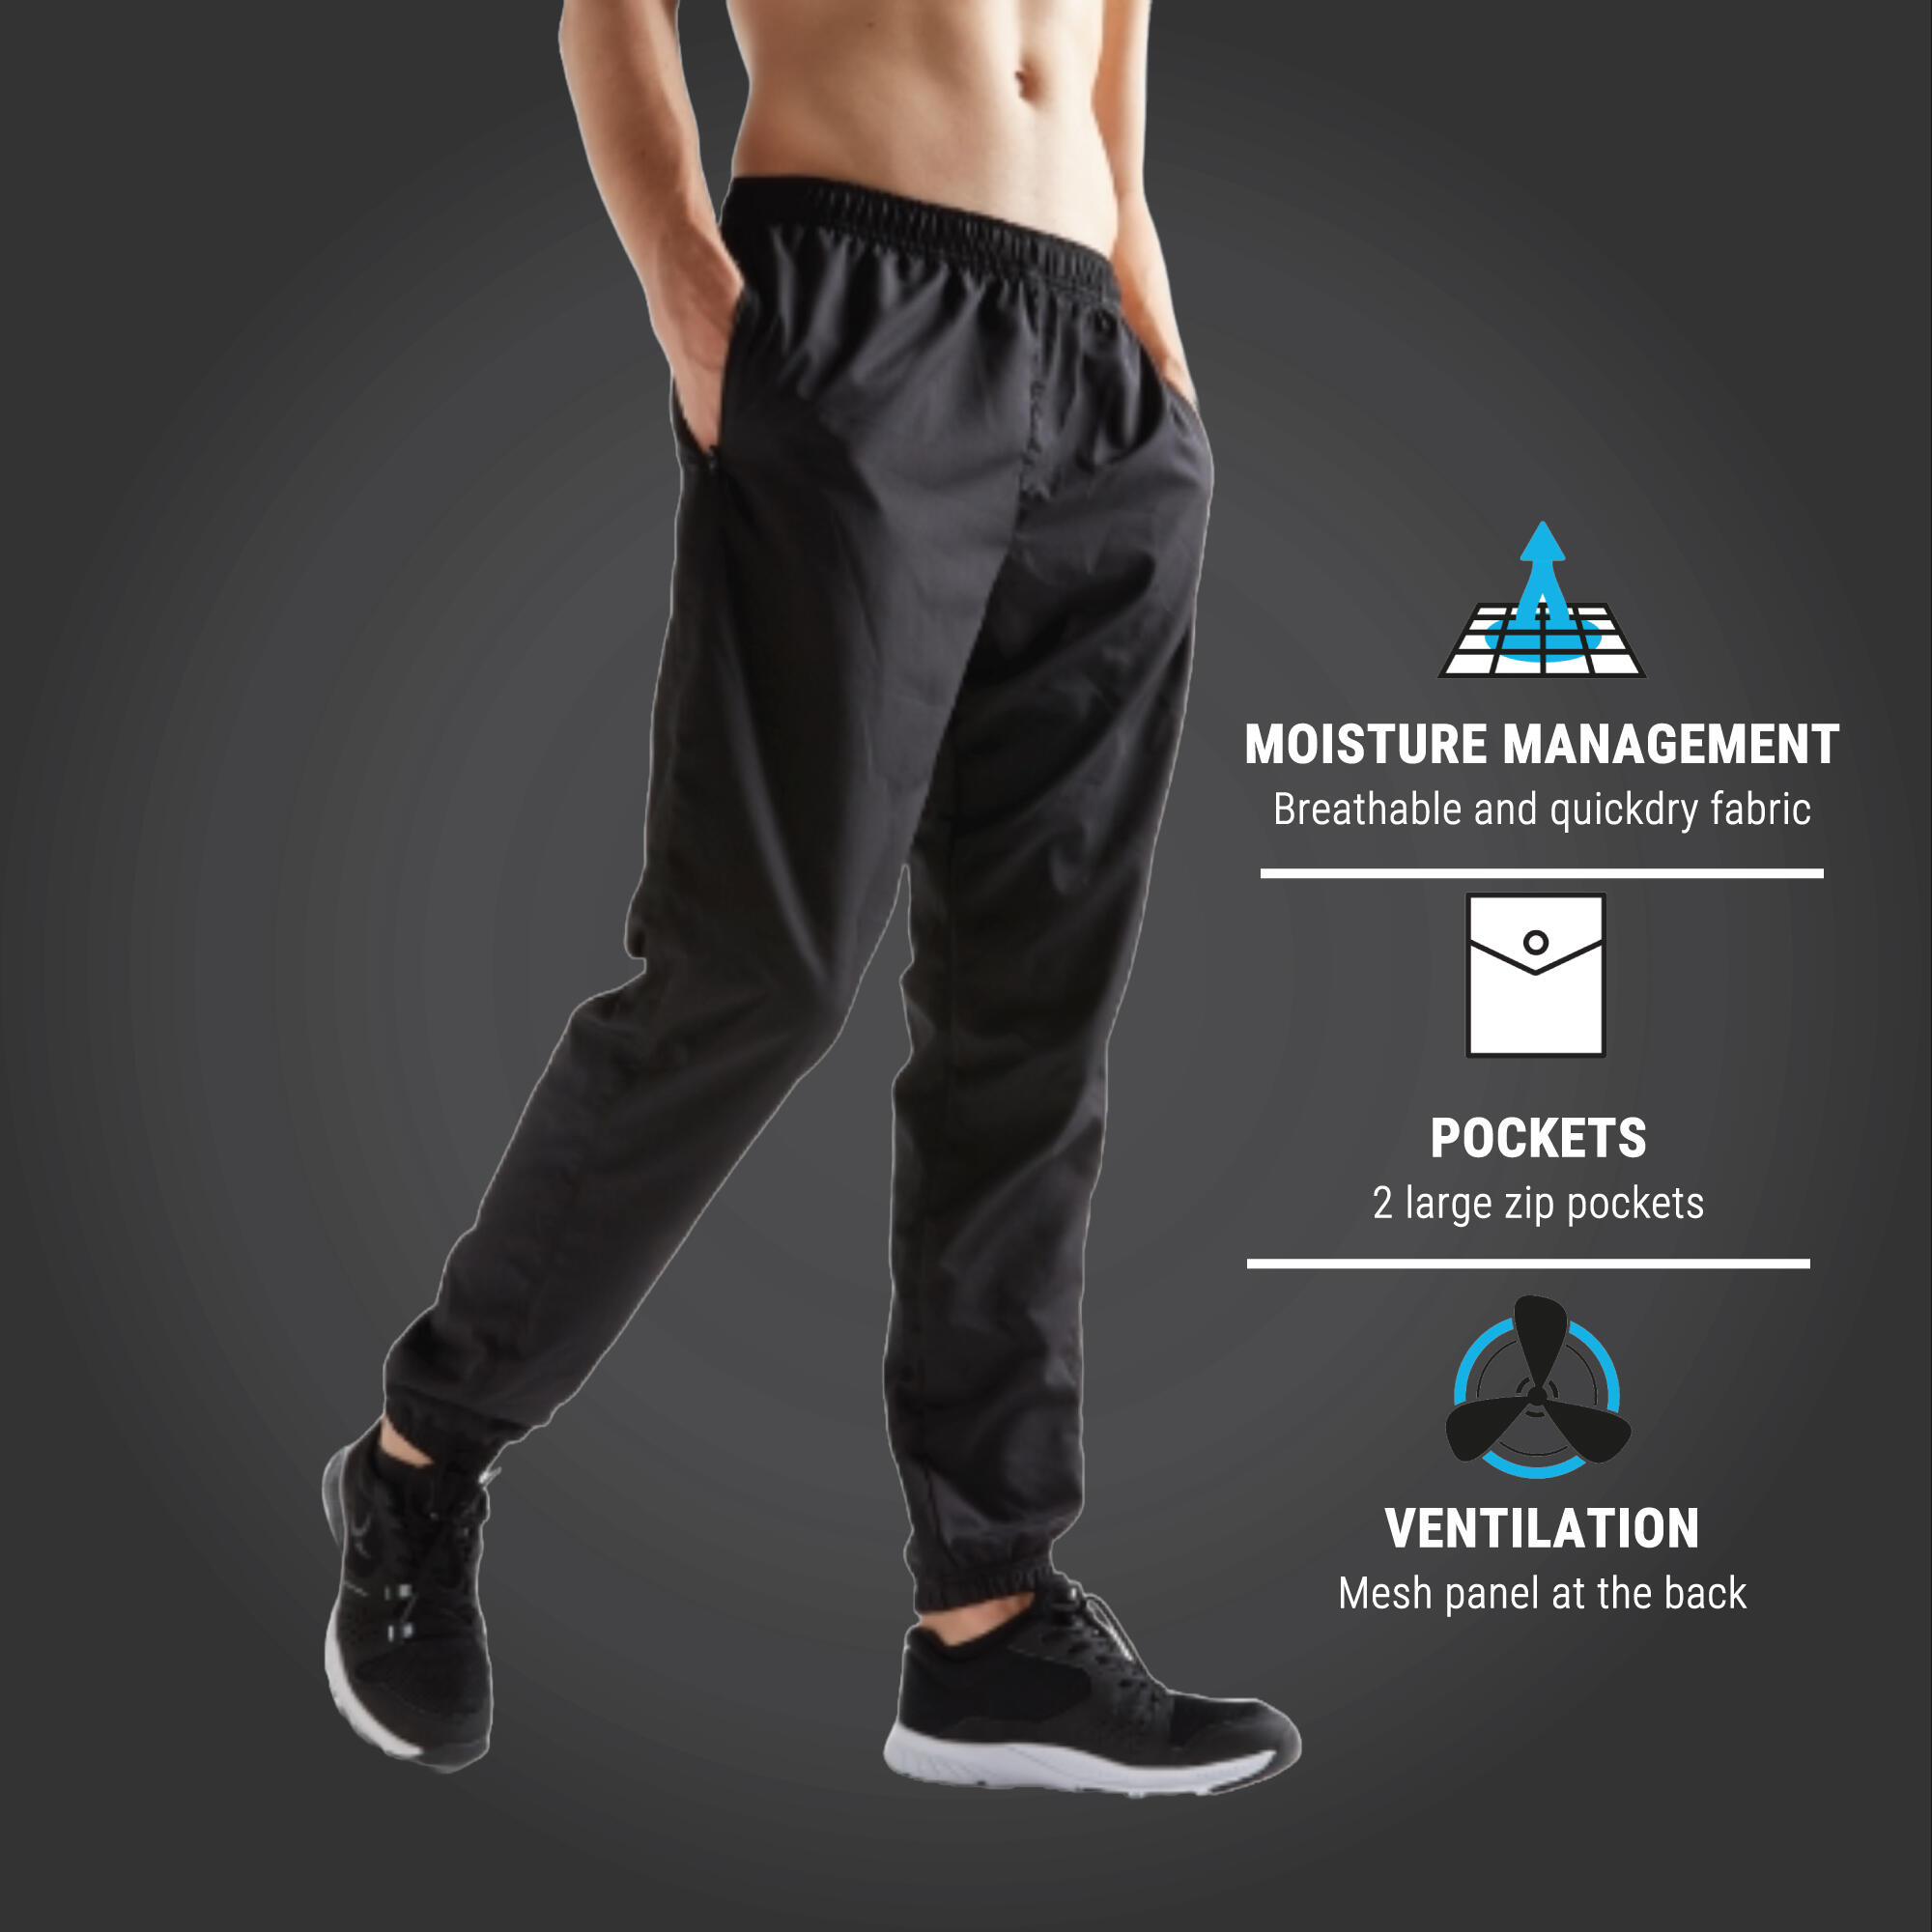 Poomer Clothing - old - Stylish Track Pants now at just Rs. 399. Shop now  at www.poomer.net and avail Free Shipping & Cash on Delivery !! Shop:  bit.ly/PoomerTrackPant ✓ Best quality ✓